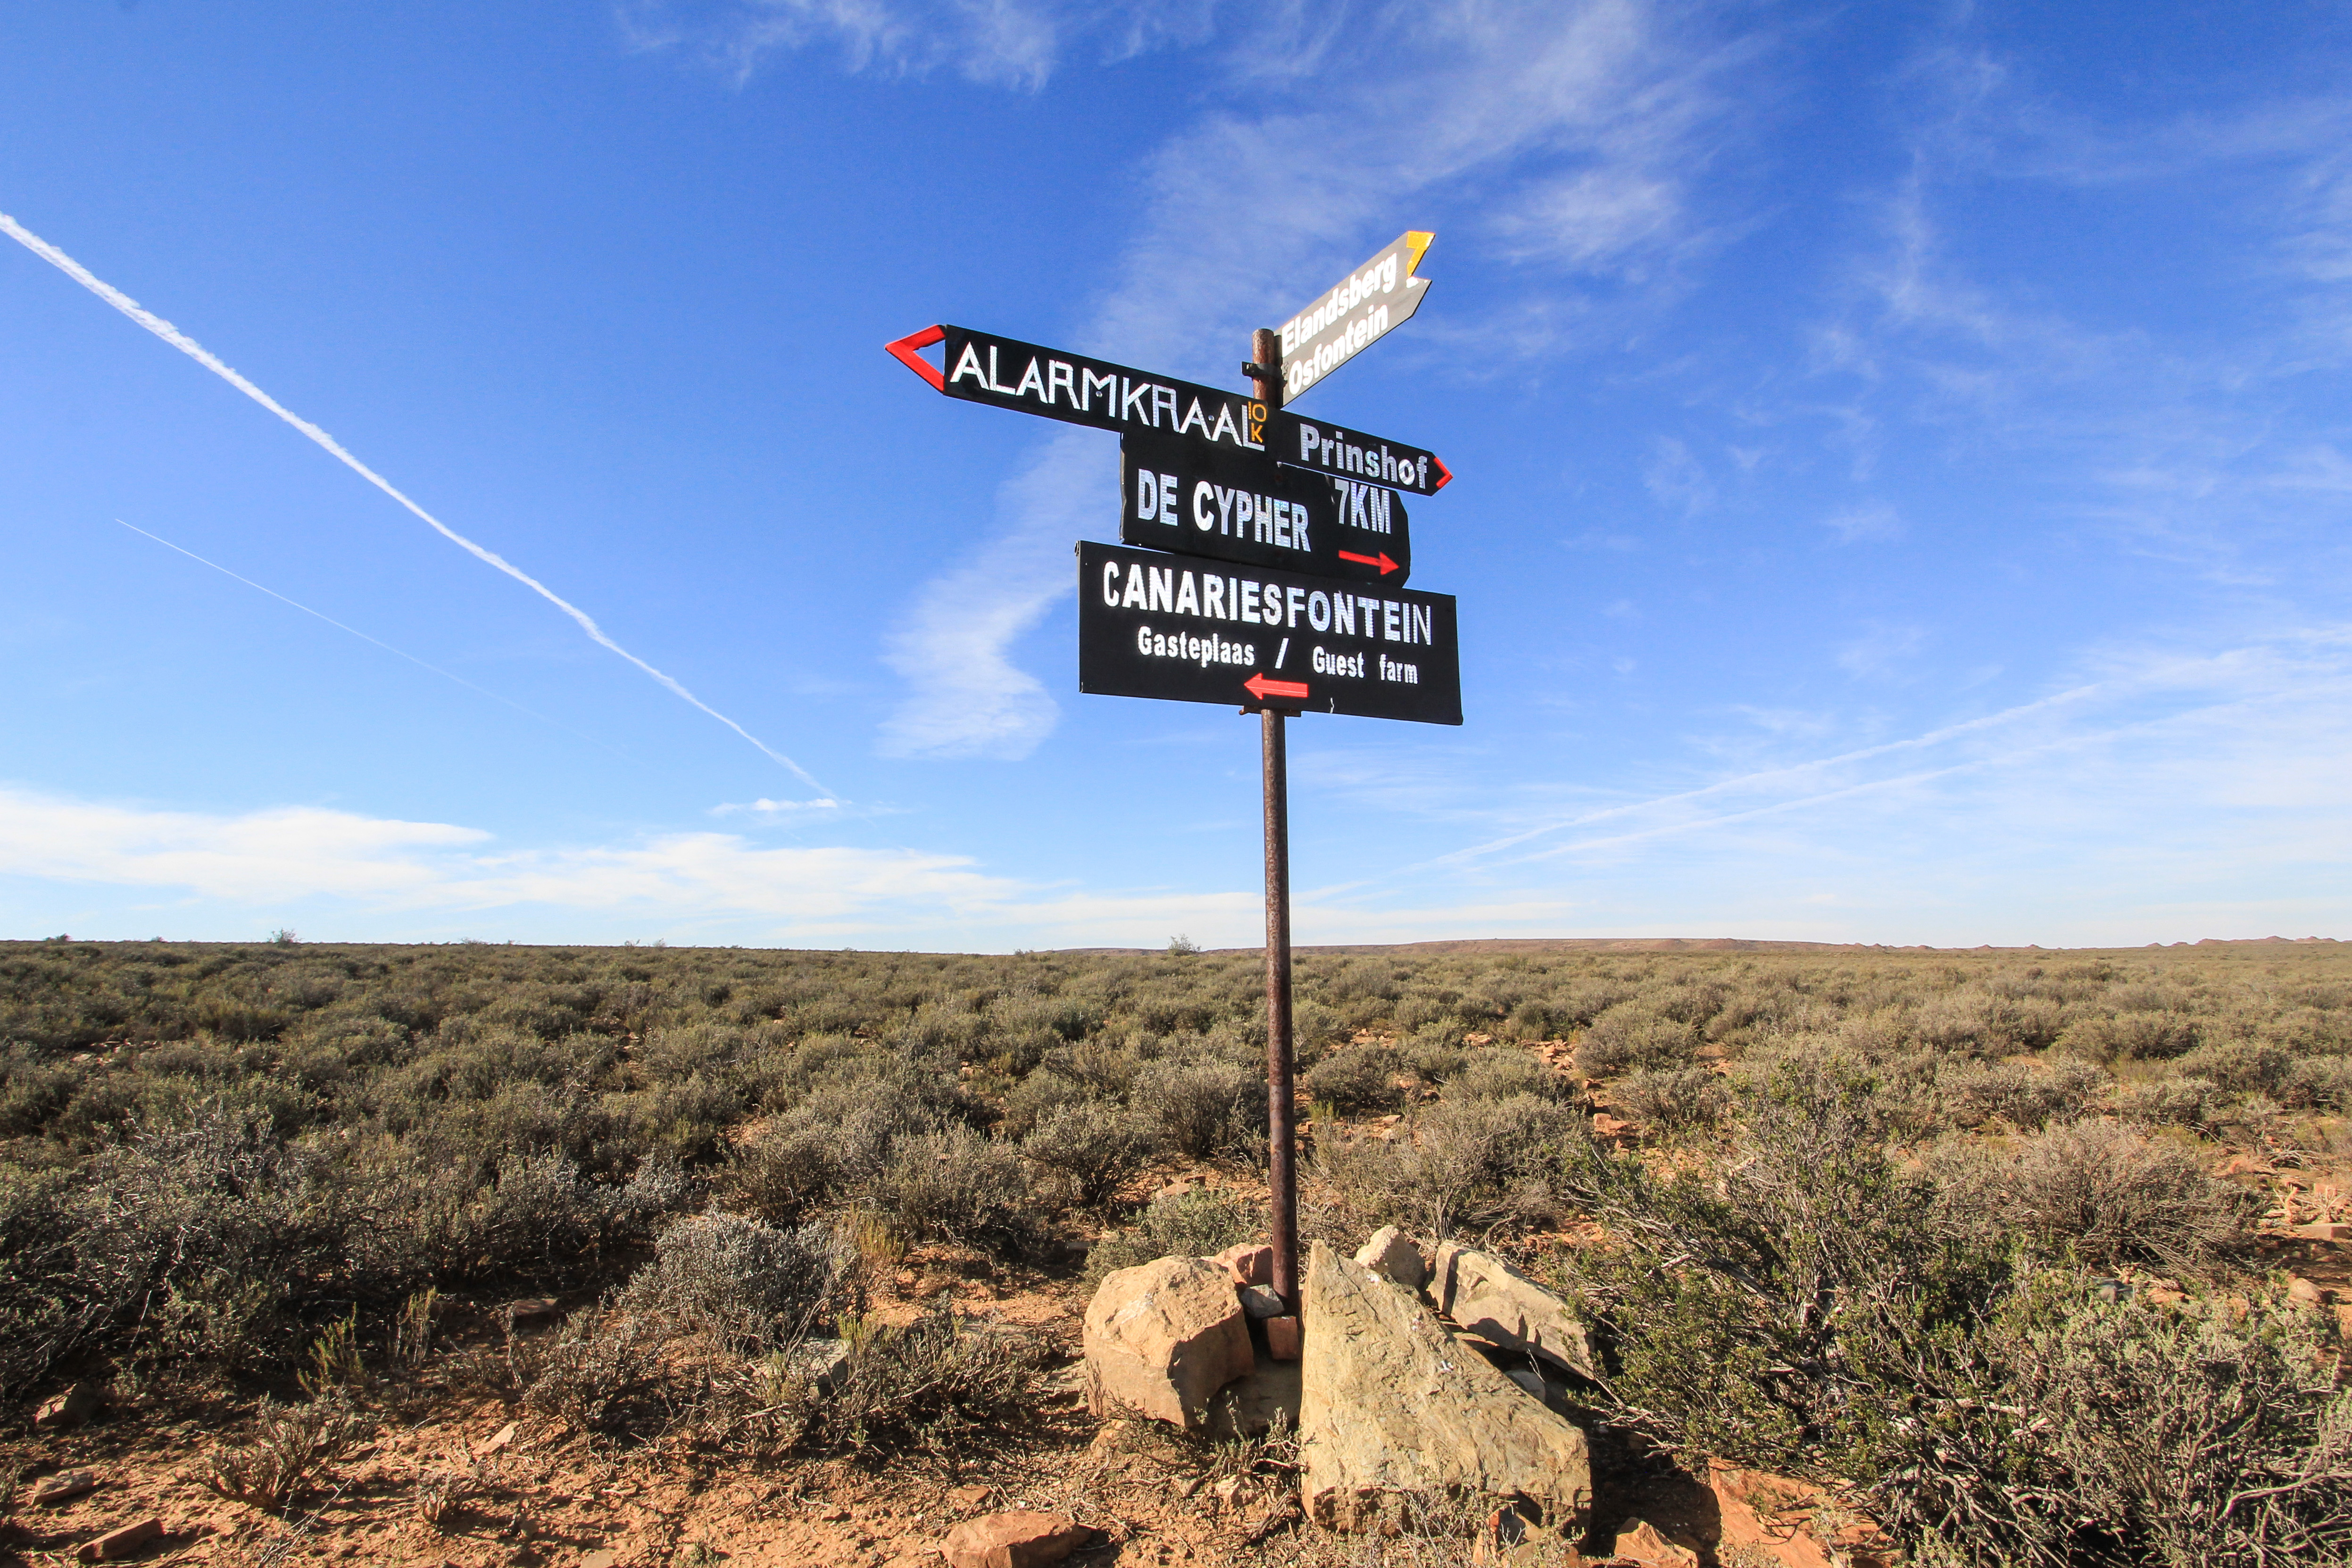 At the crossroads leading to many farms, one follows the sign to Canariesfontein. Image: Chris Marais